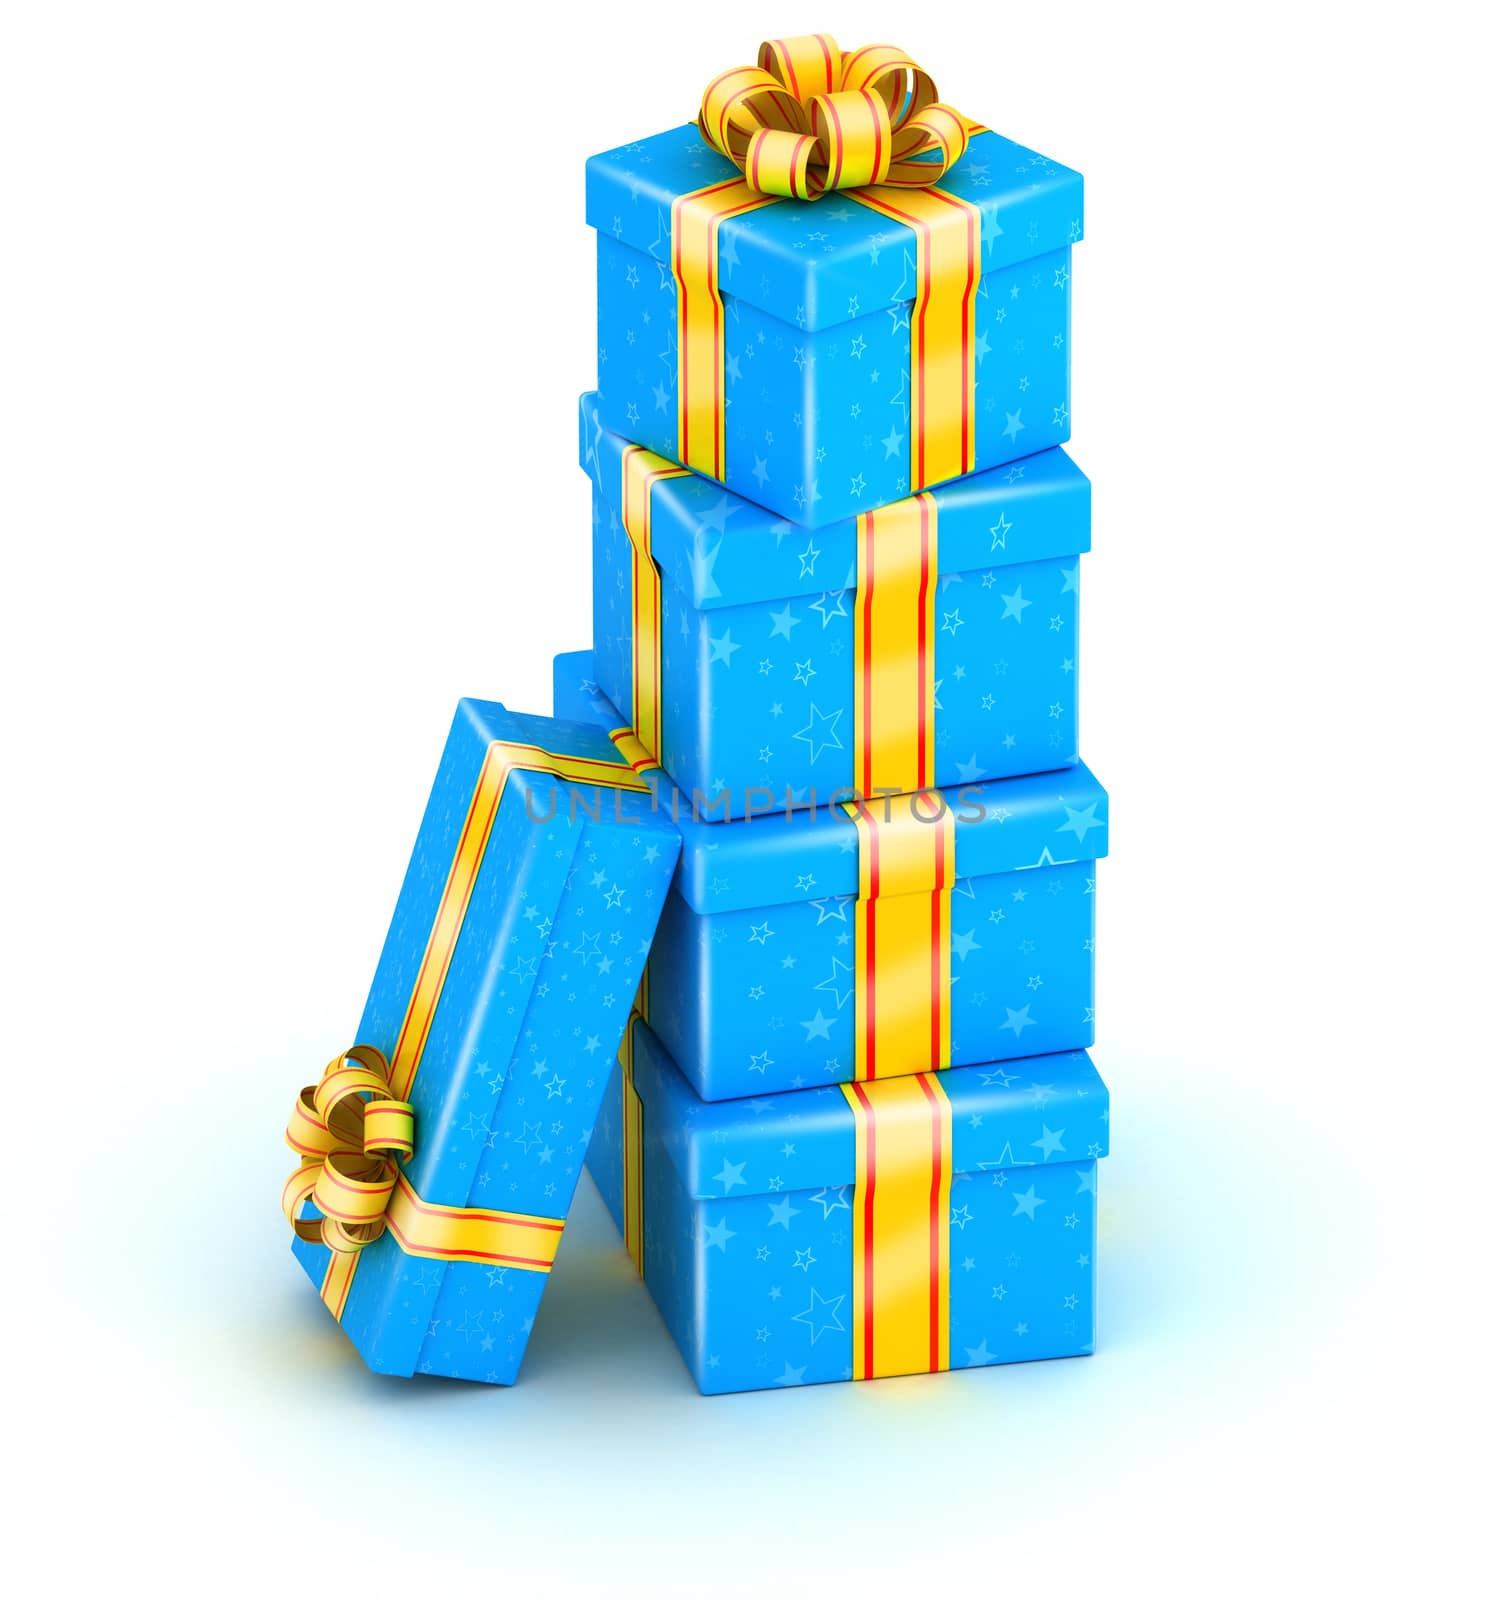 Stack of gift boxes by iunewind